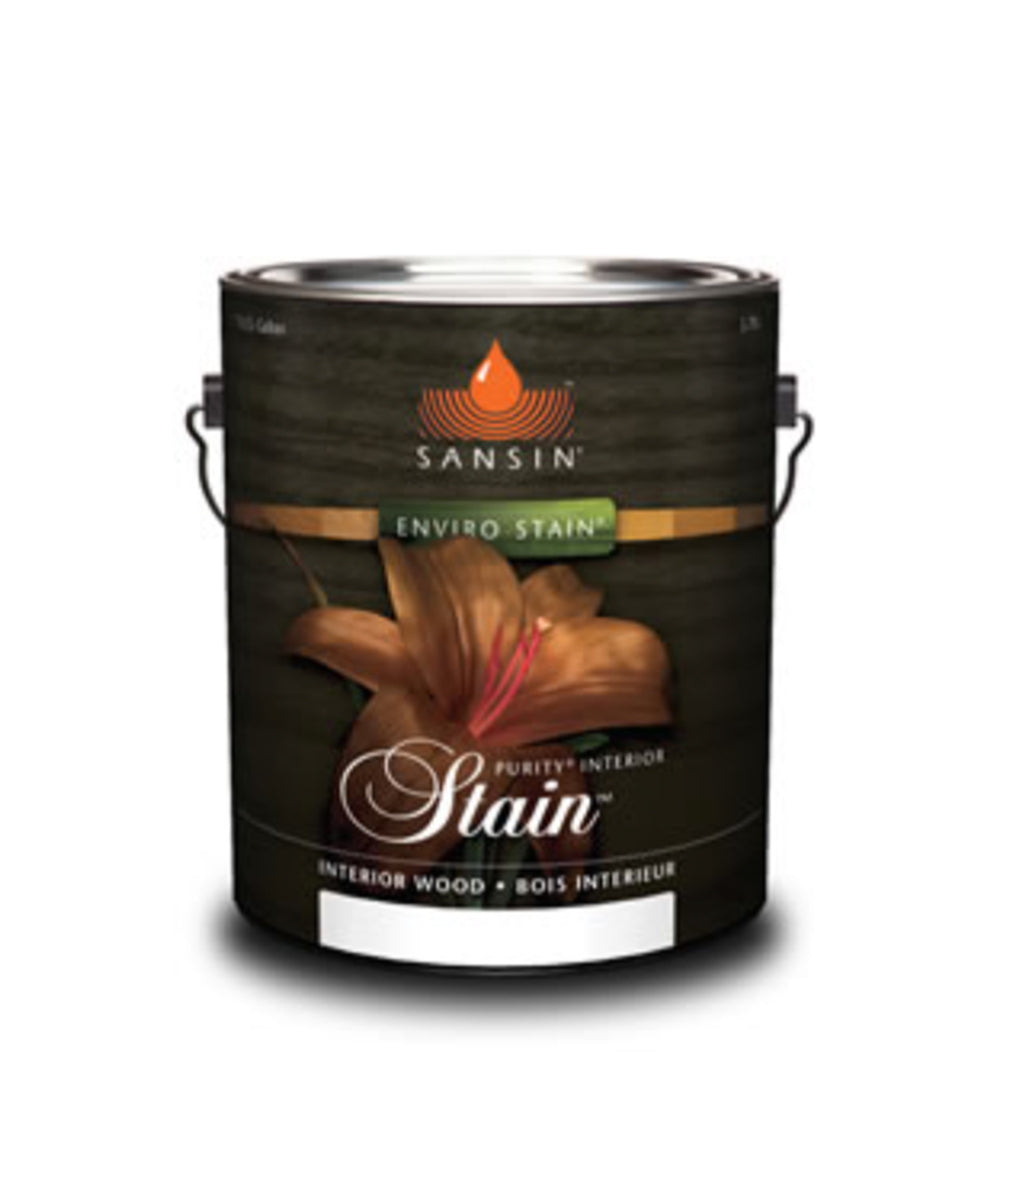 Sansin Interior Stain, available at Clement's Paint in Austin, TX.